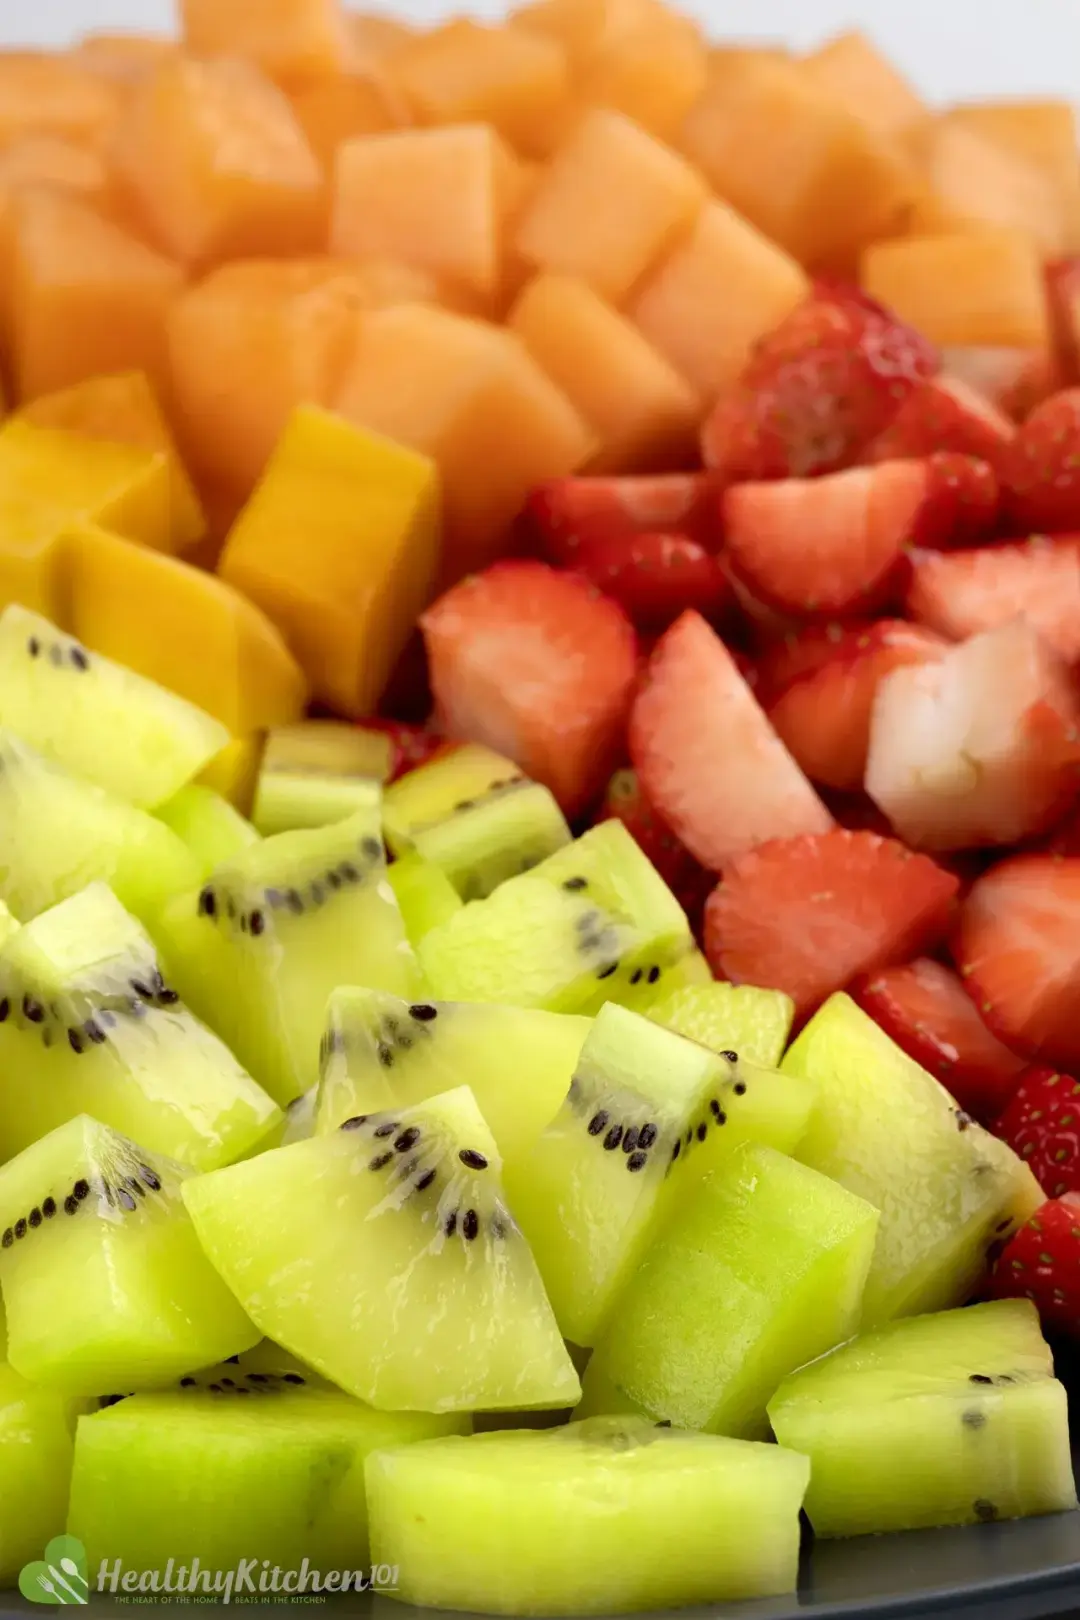 A close-up of a mixed fruit salad with watermelon, cantaloupe, honeydew, grapes, and blueberries.